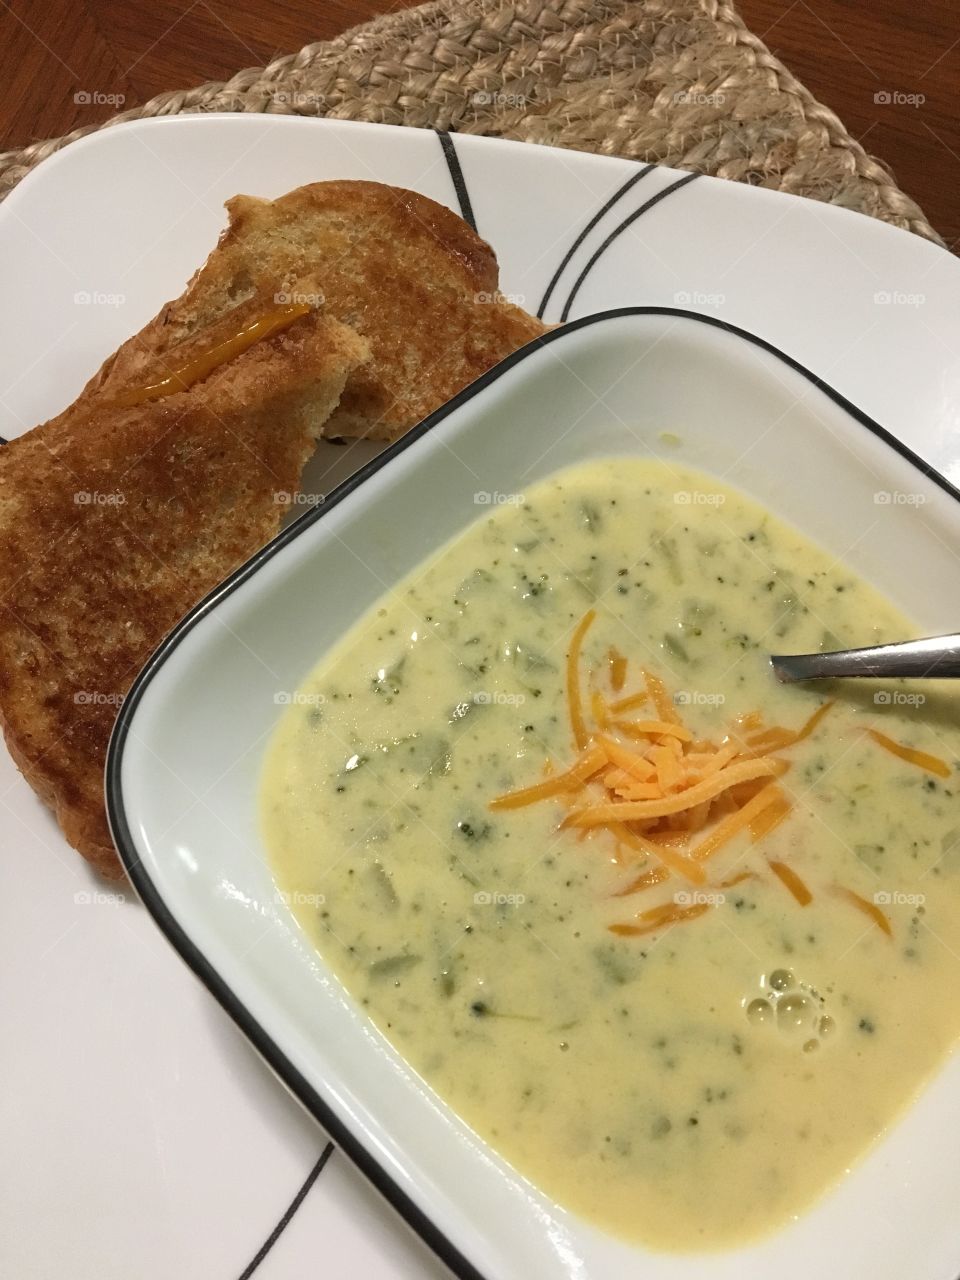 Grilled Cheese Sandwich and Broccoli Cheese Soup 